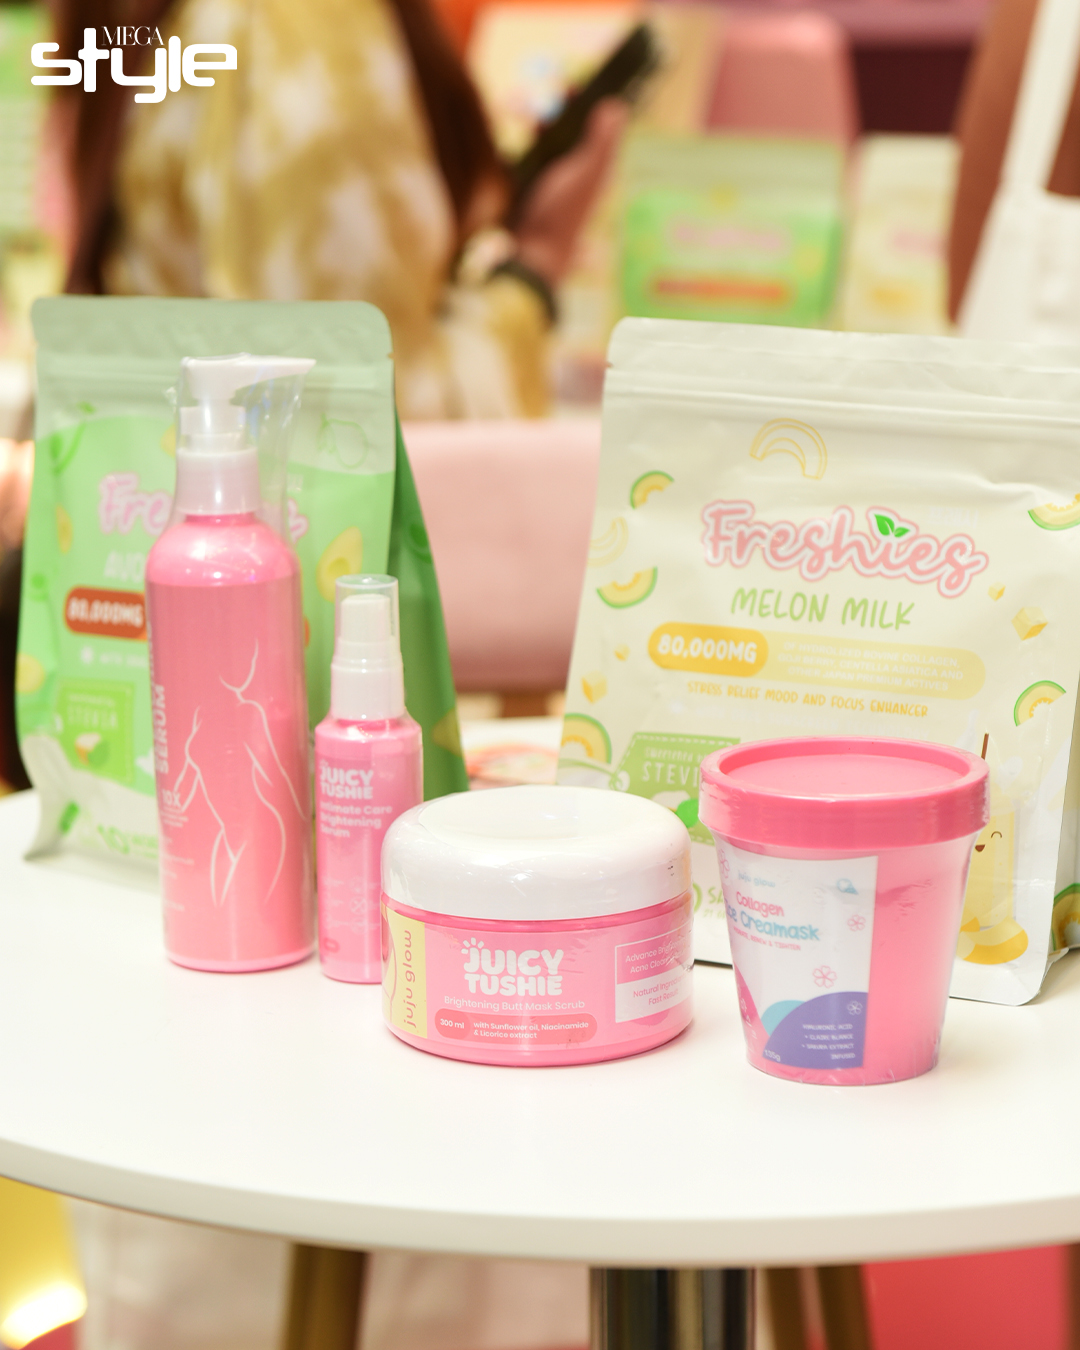 Juicy Tushie with Body and Bleaching Serum, Juicy Tushie Intimate Care Brightening Serum, Juicy Tushie Brightening Butt Mask Scrub, Collagen Ice Cream Mask, and Freshies Melon Drink